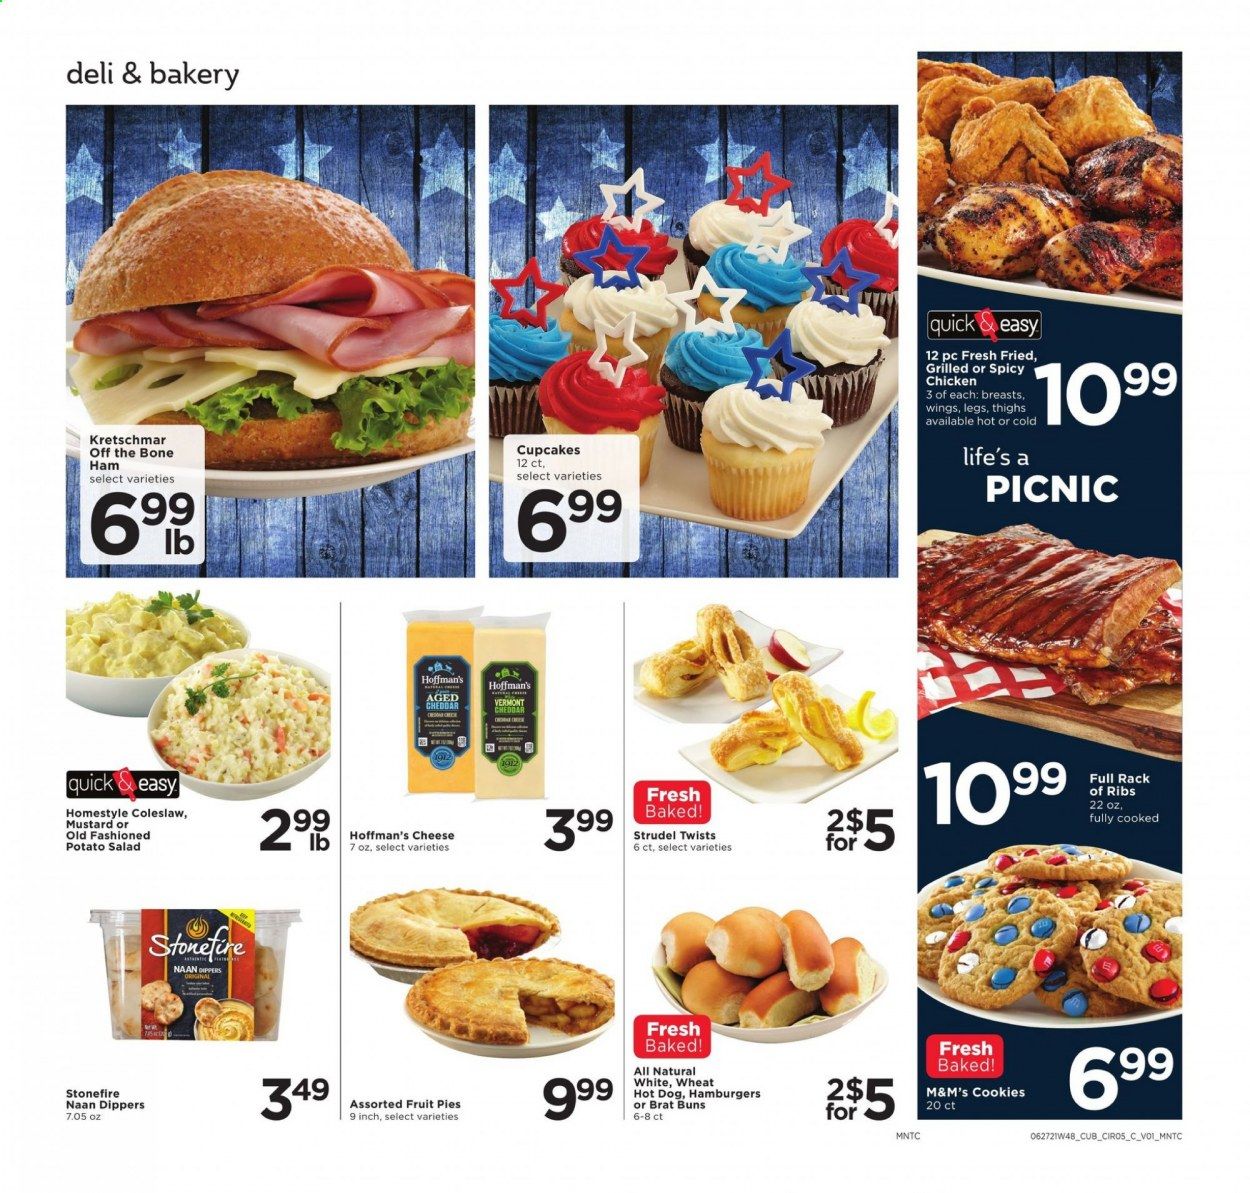 Cub Foods (MN) Weekly Ad Flyer June 27 to July 4